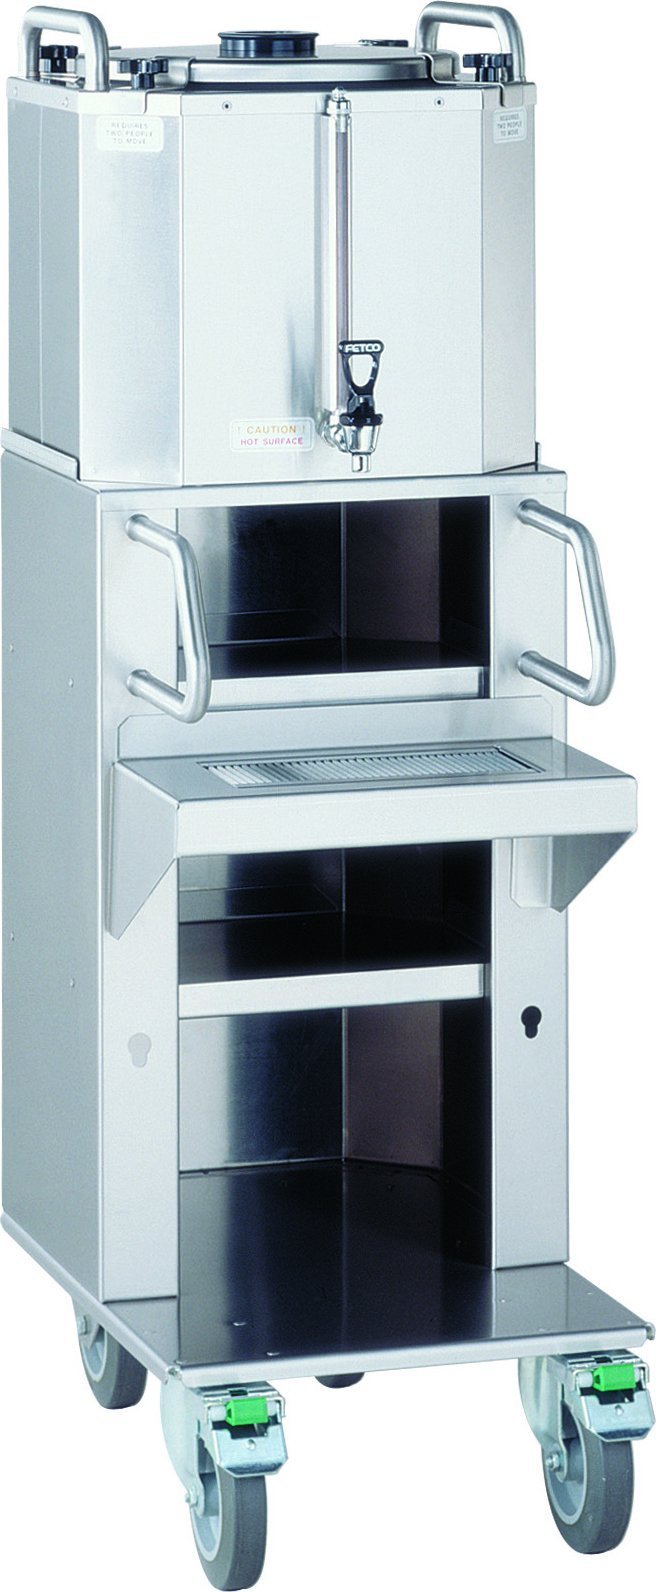 Fetco - 22.8 L Thermal Dispenser with Rolling Shelf Cart - LBD-6C